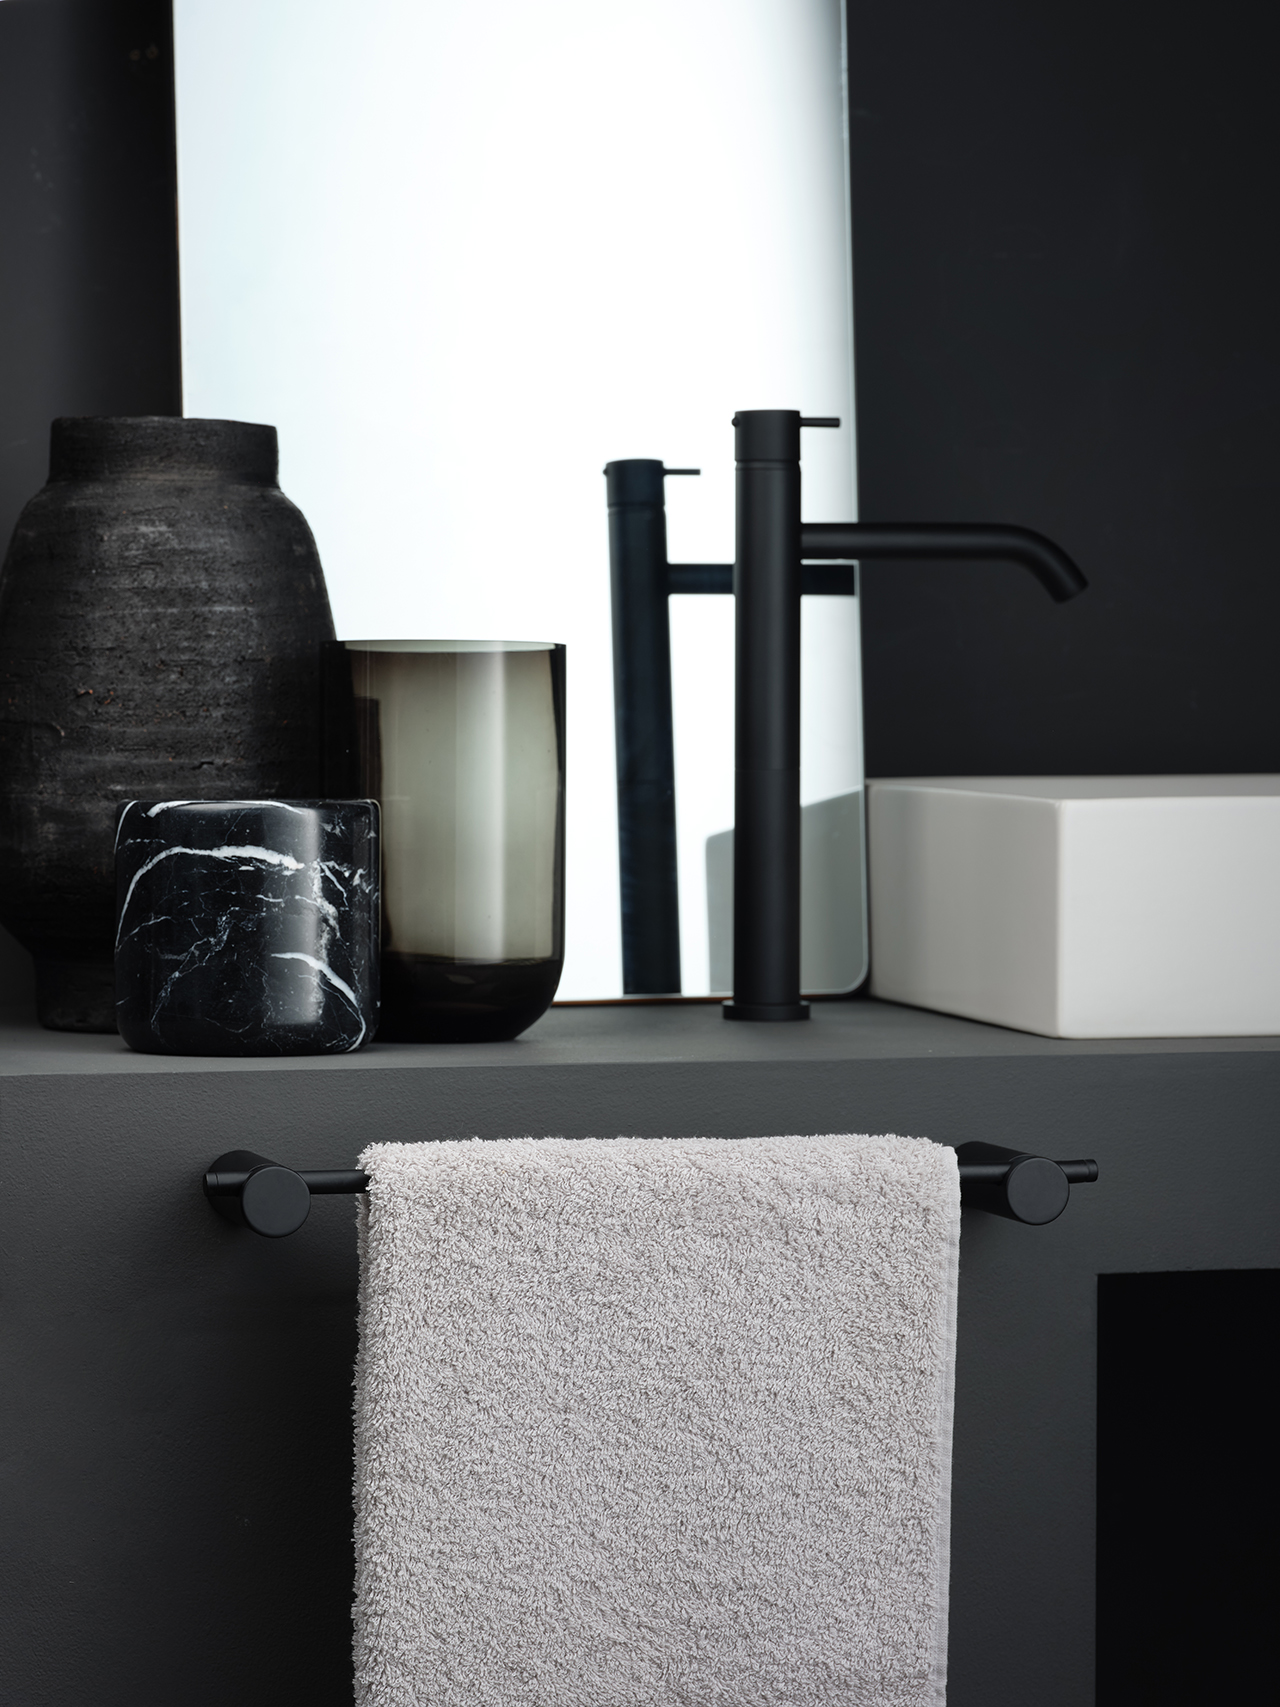 Affordable Bathroom Decor & Accessories: Explore a Variety of Stylish Bath Accessories